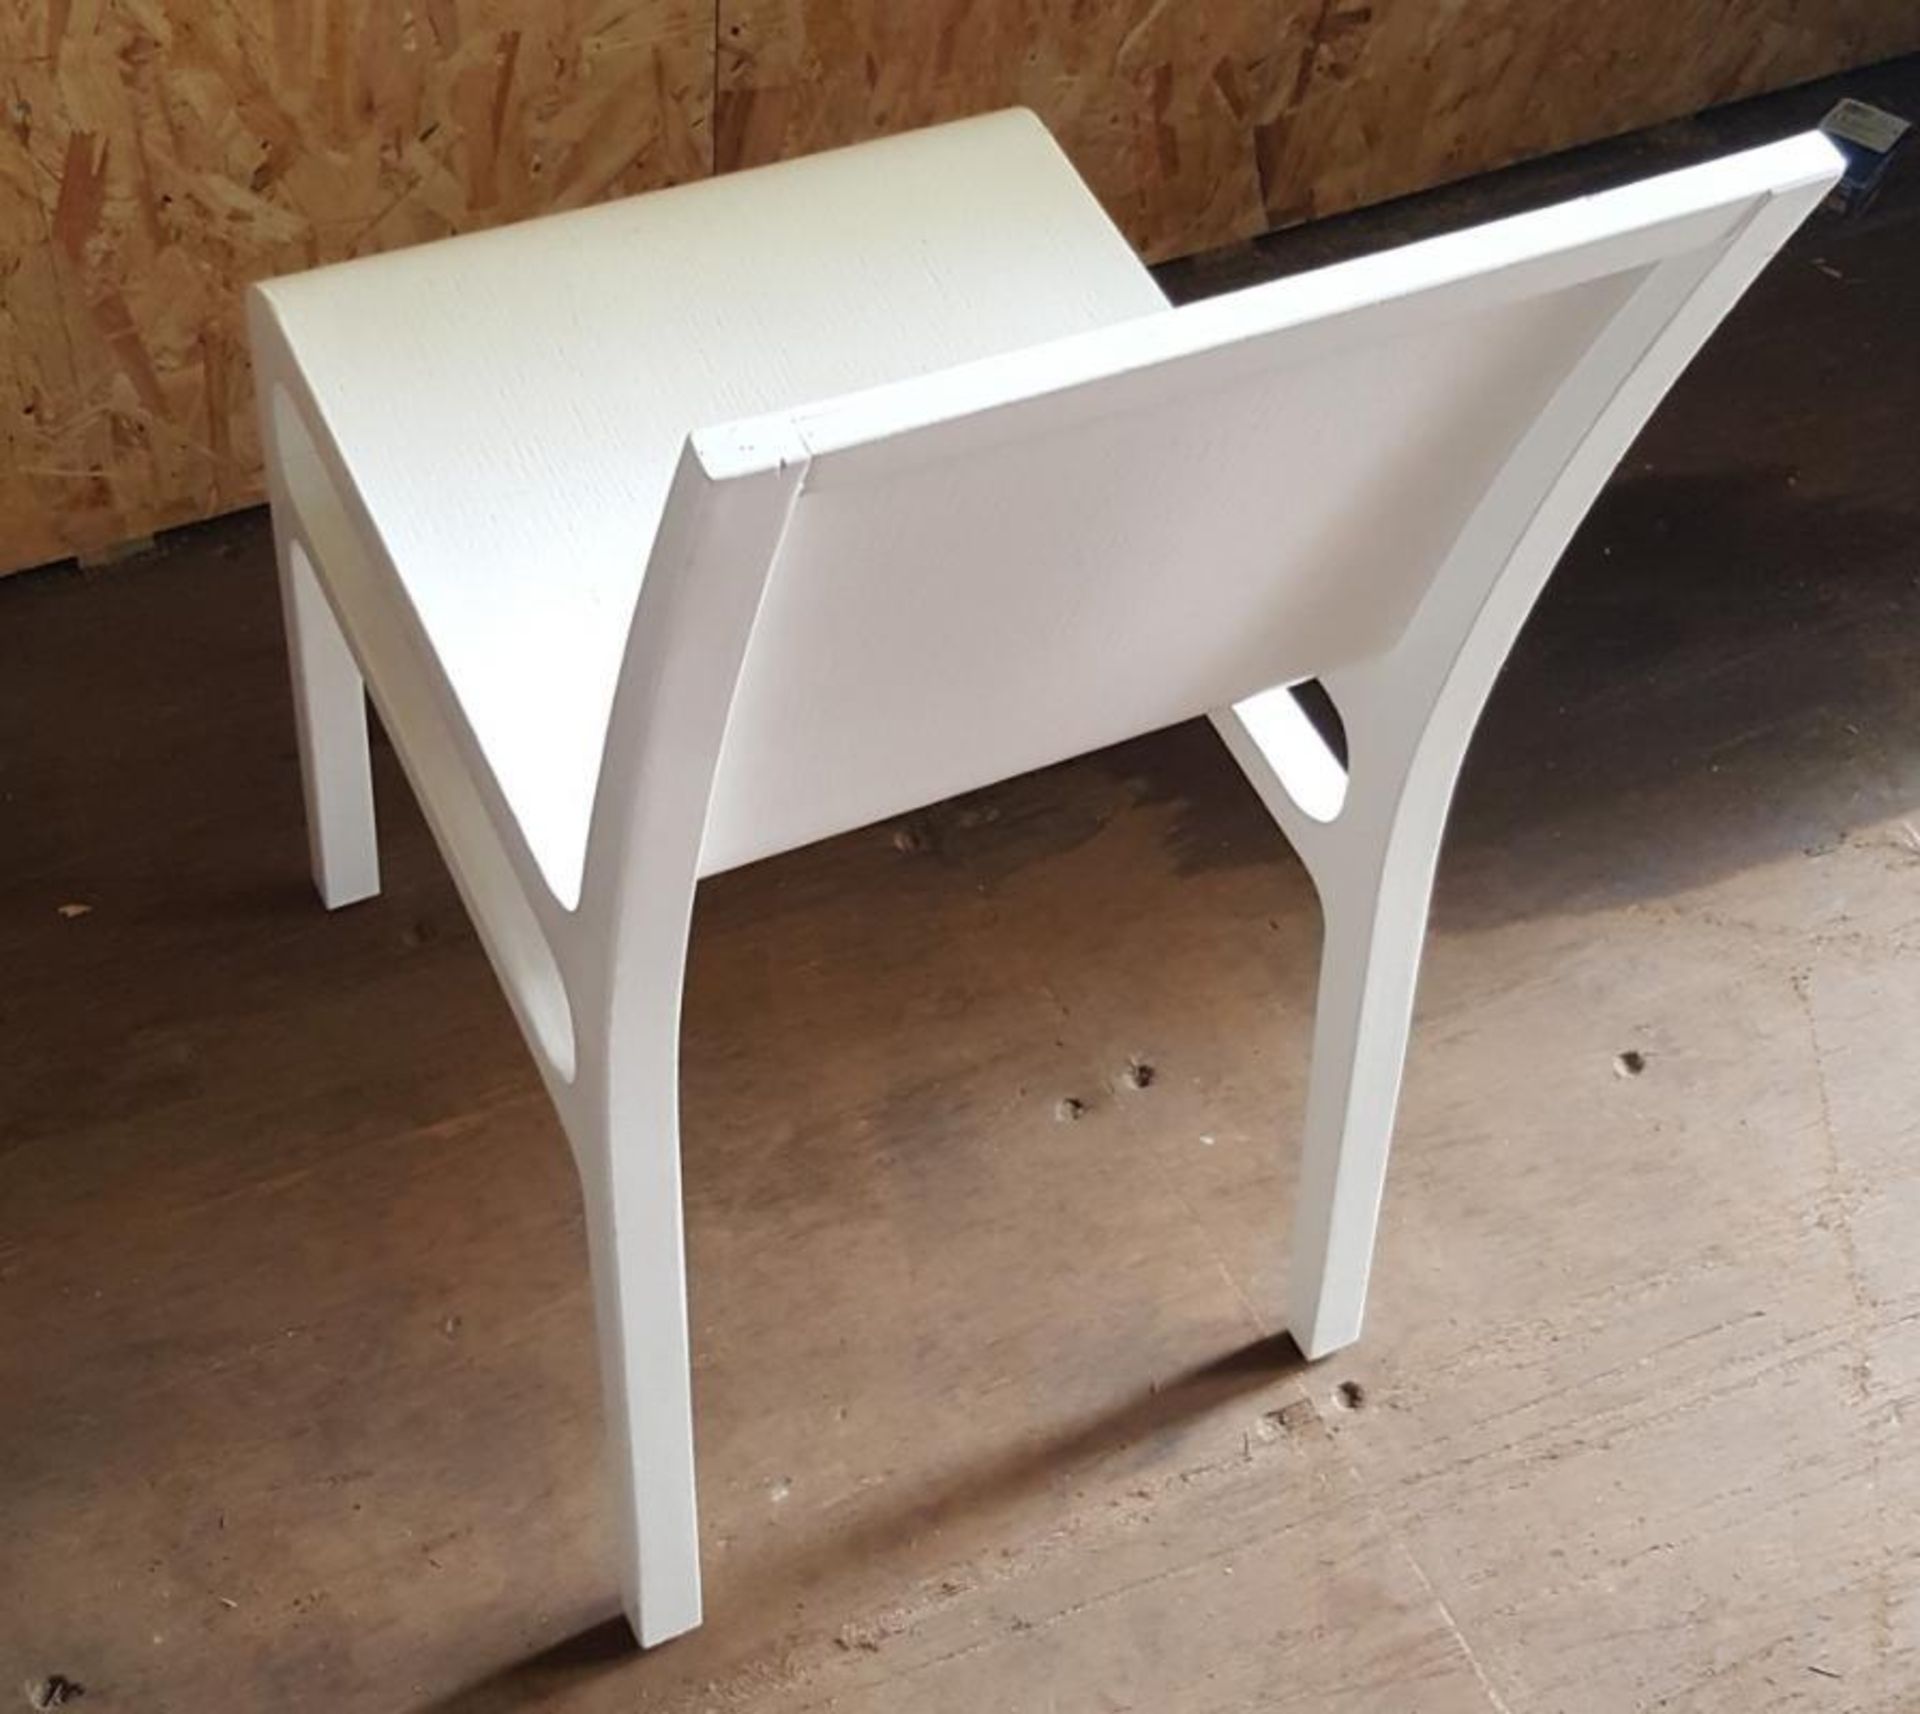 4 x Wooden Dining Chairs Set With A Bright White Finish - Dimensions: Used, In Good Condition - Ref - Image 6 of 6